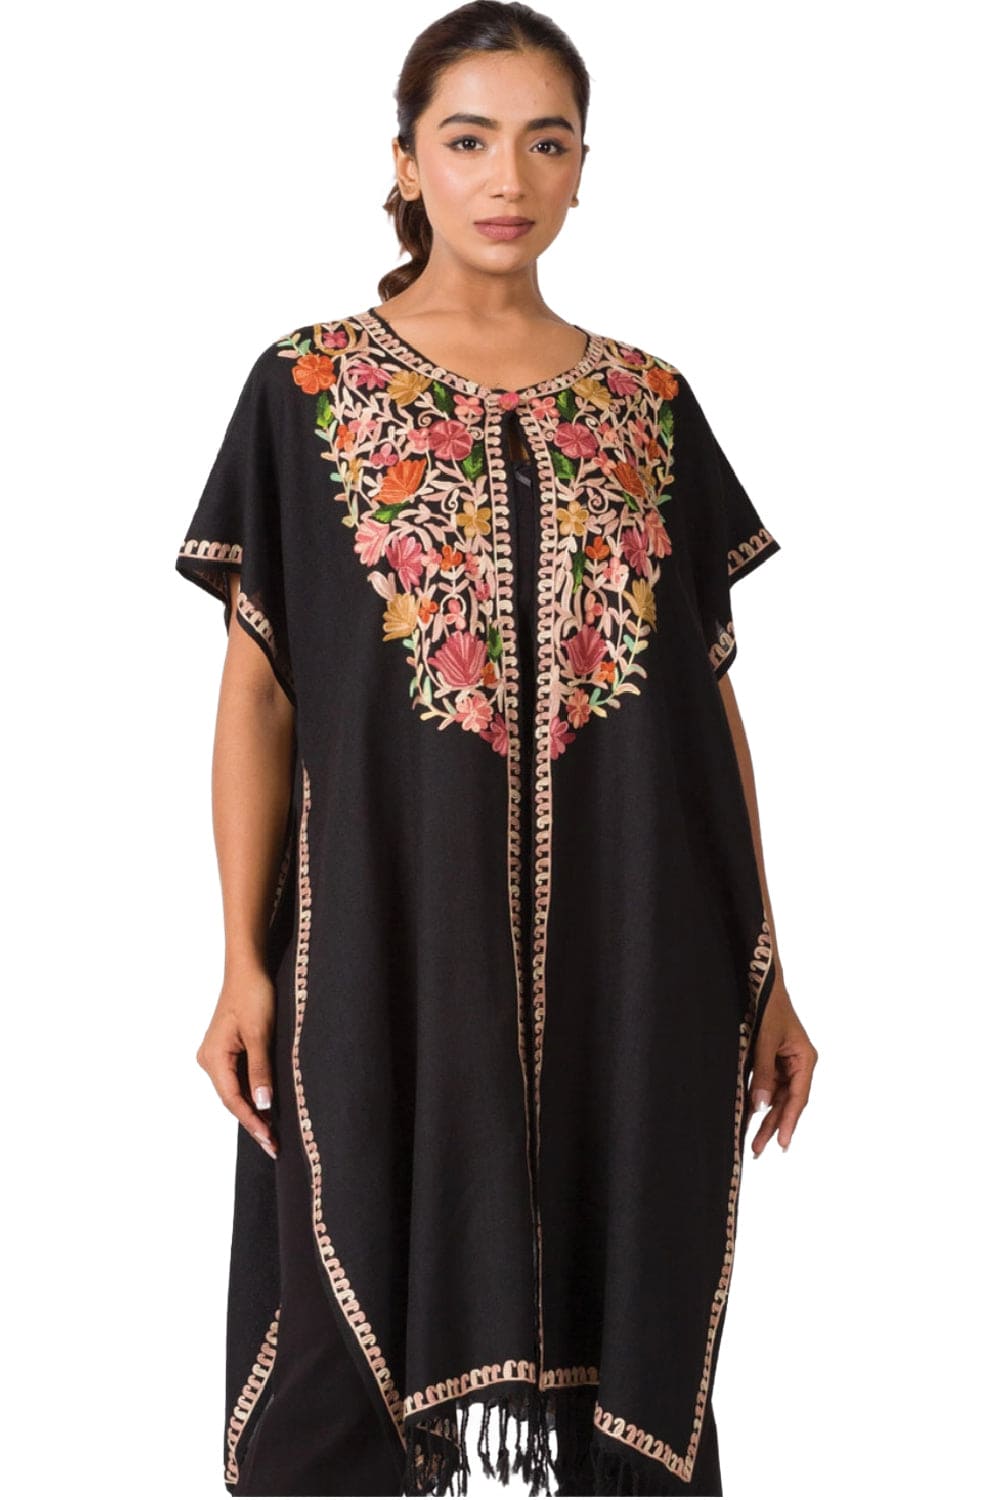 Women's Caftan with embroidery.